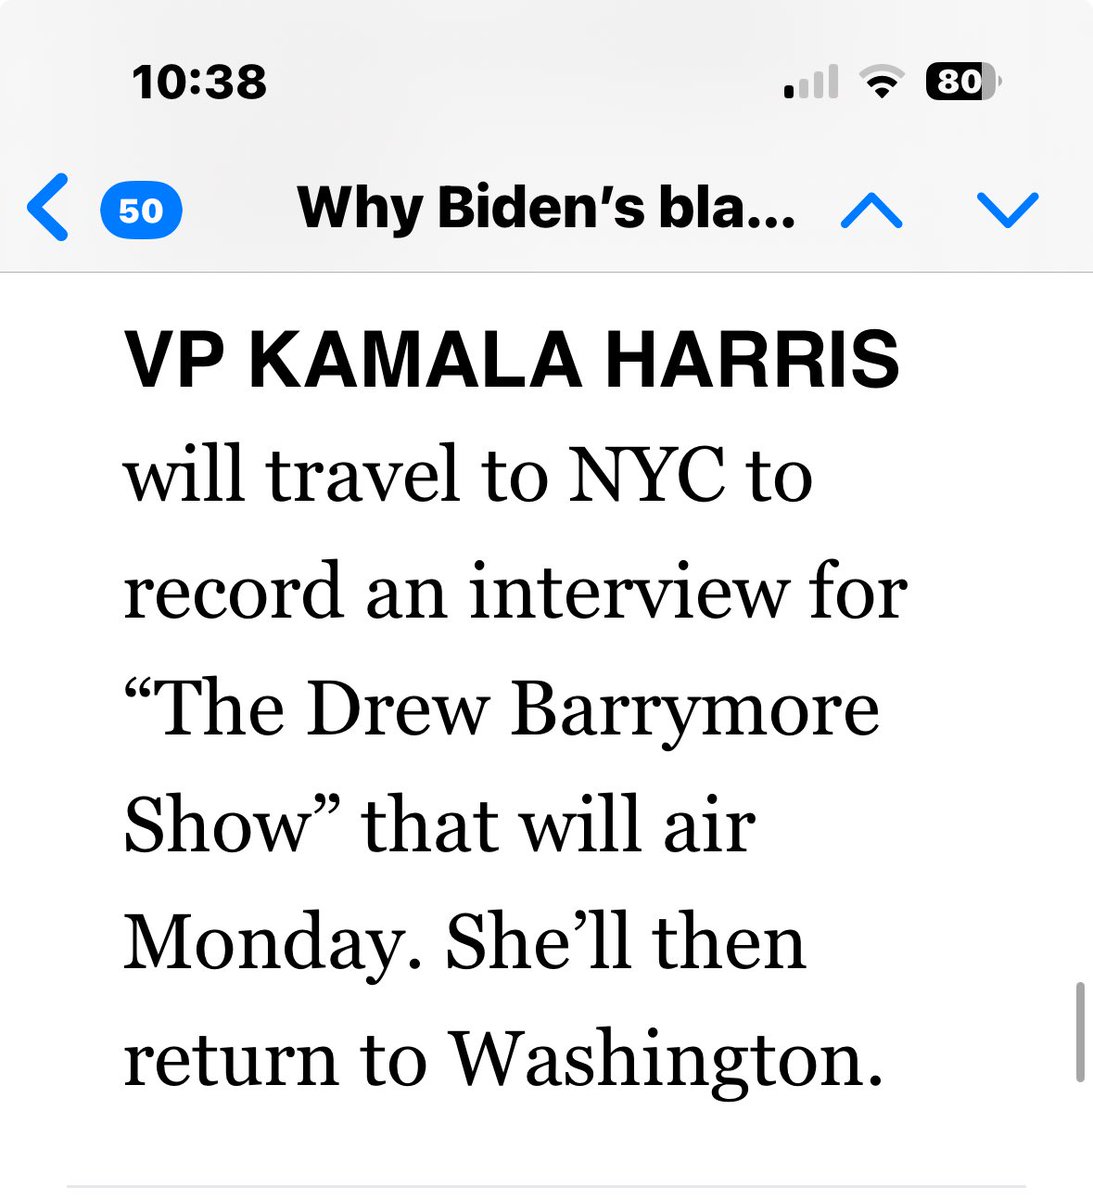 Why can’t this honest travel to DC for this taped interview? Why do taxpayers or campaign have to pay for it? It costs a fortune in security etc. ⁦@politico⁩